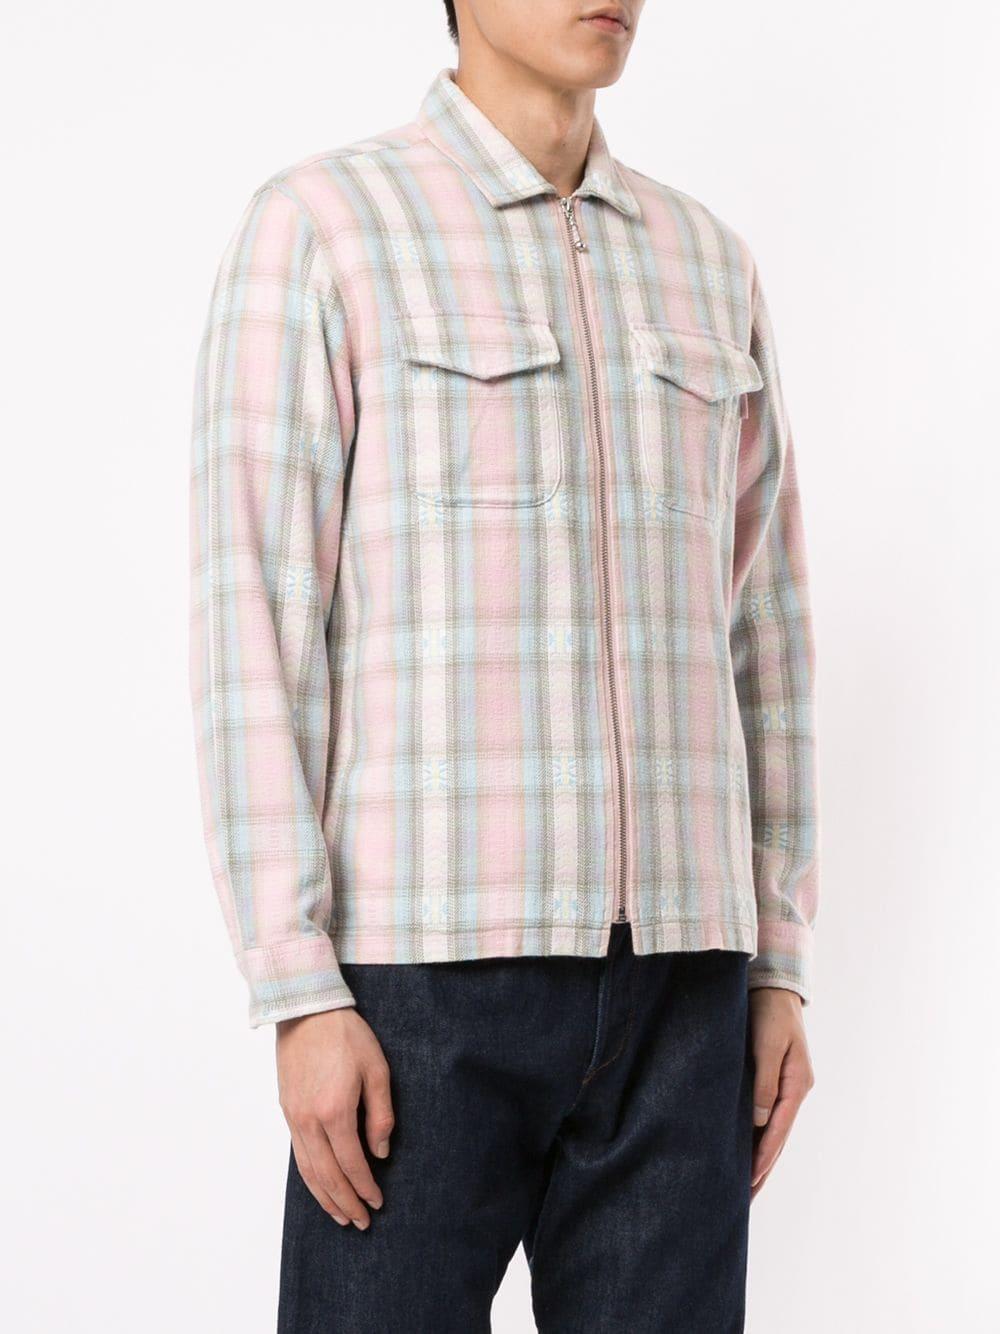 Supreme Plaid Flannel Zip Up Shirt 'fw 17' in Pink for Men - Lyst